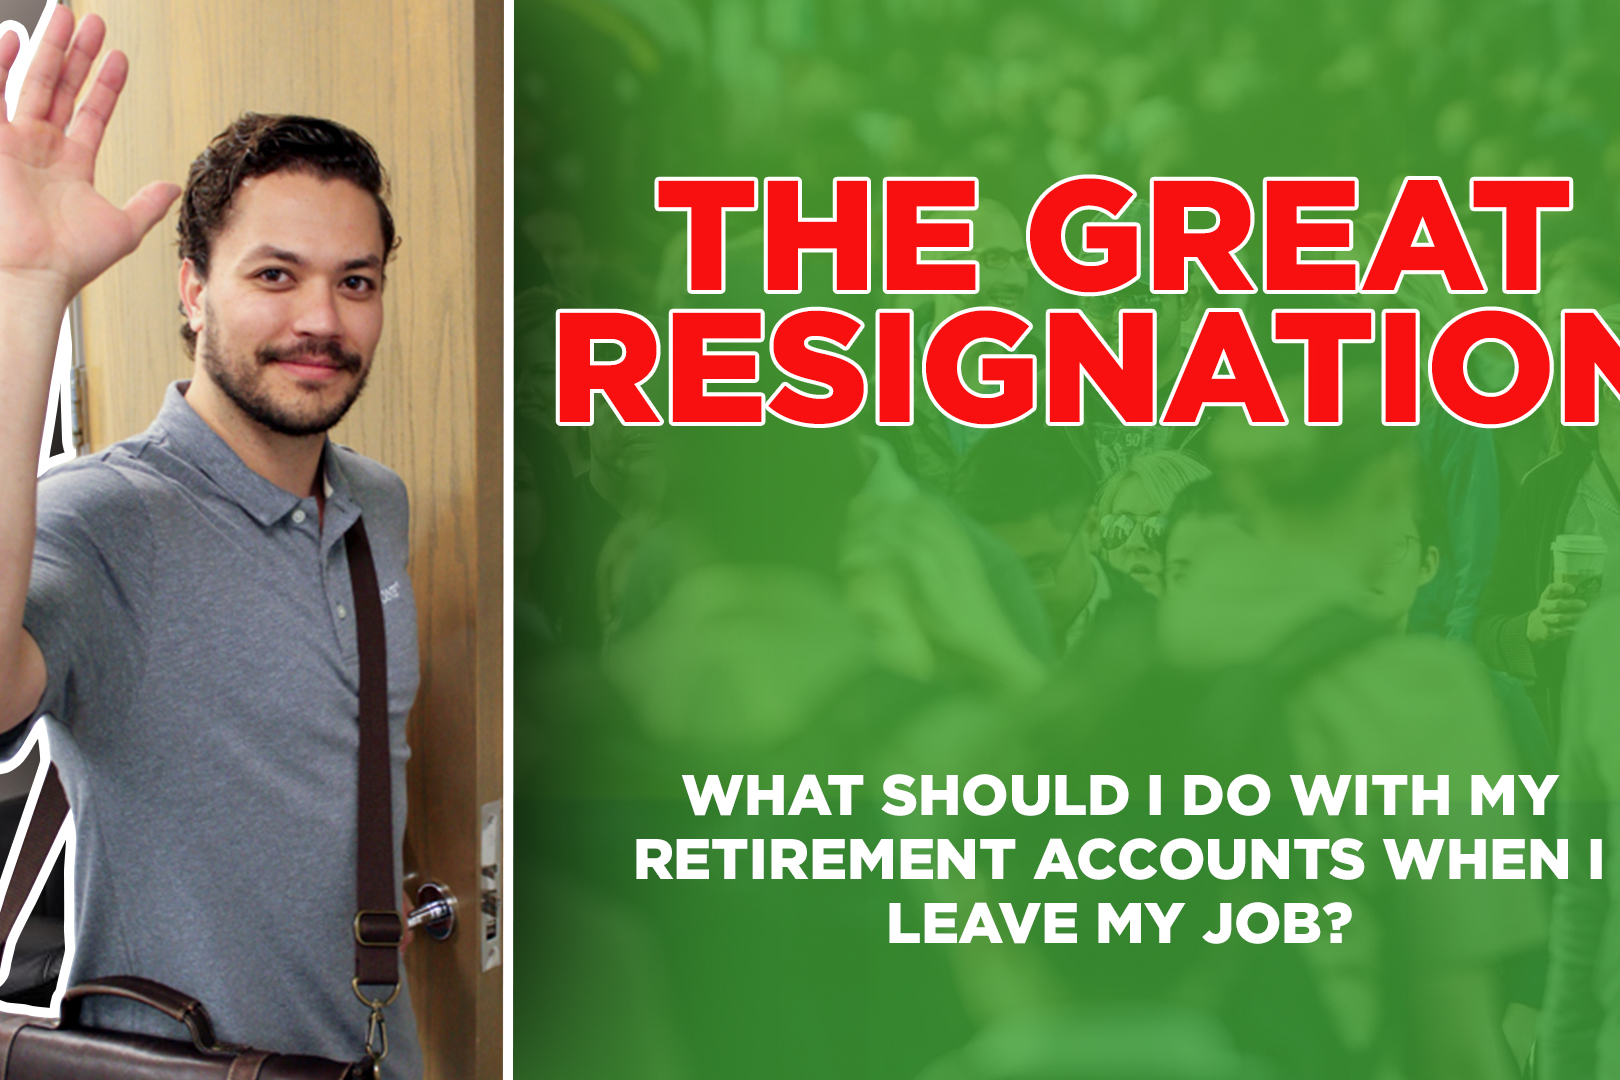 Resigning From a Job? 4 Options For Your Retirement Account